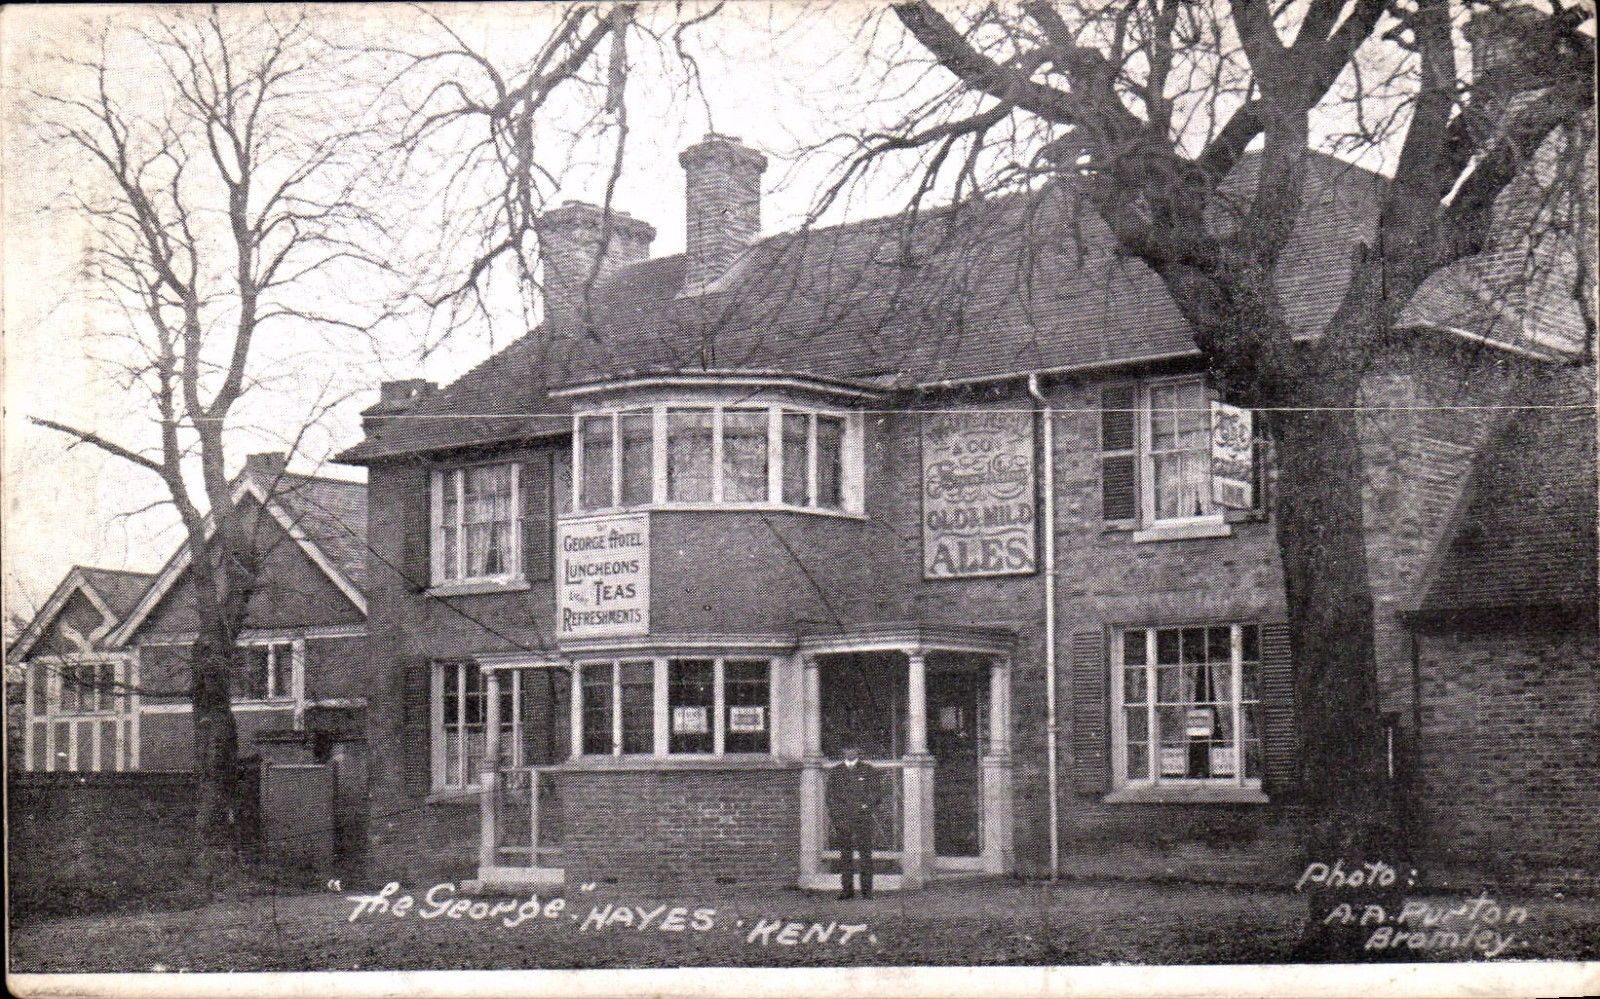 The George Public House in Hayes Kent, about 1960